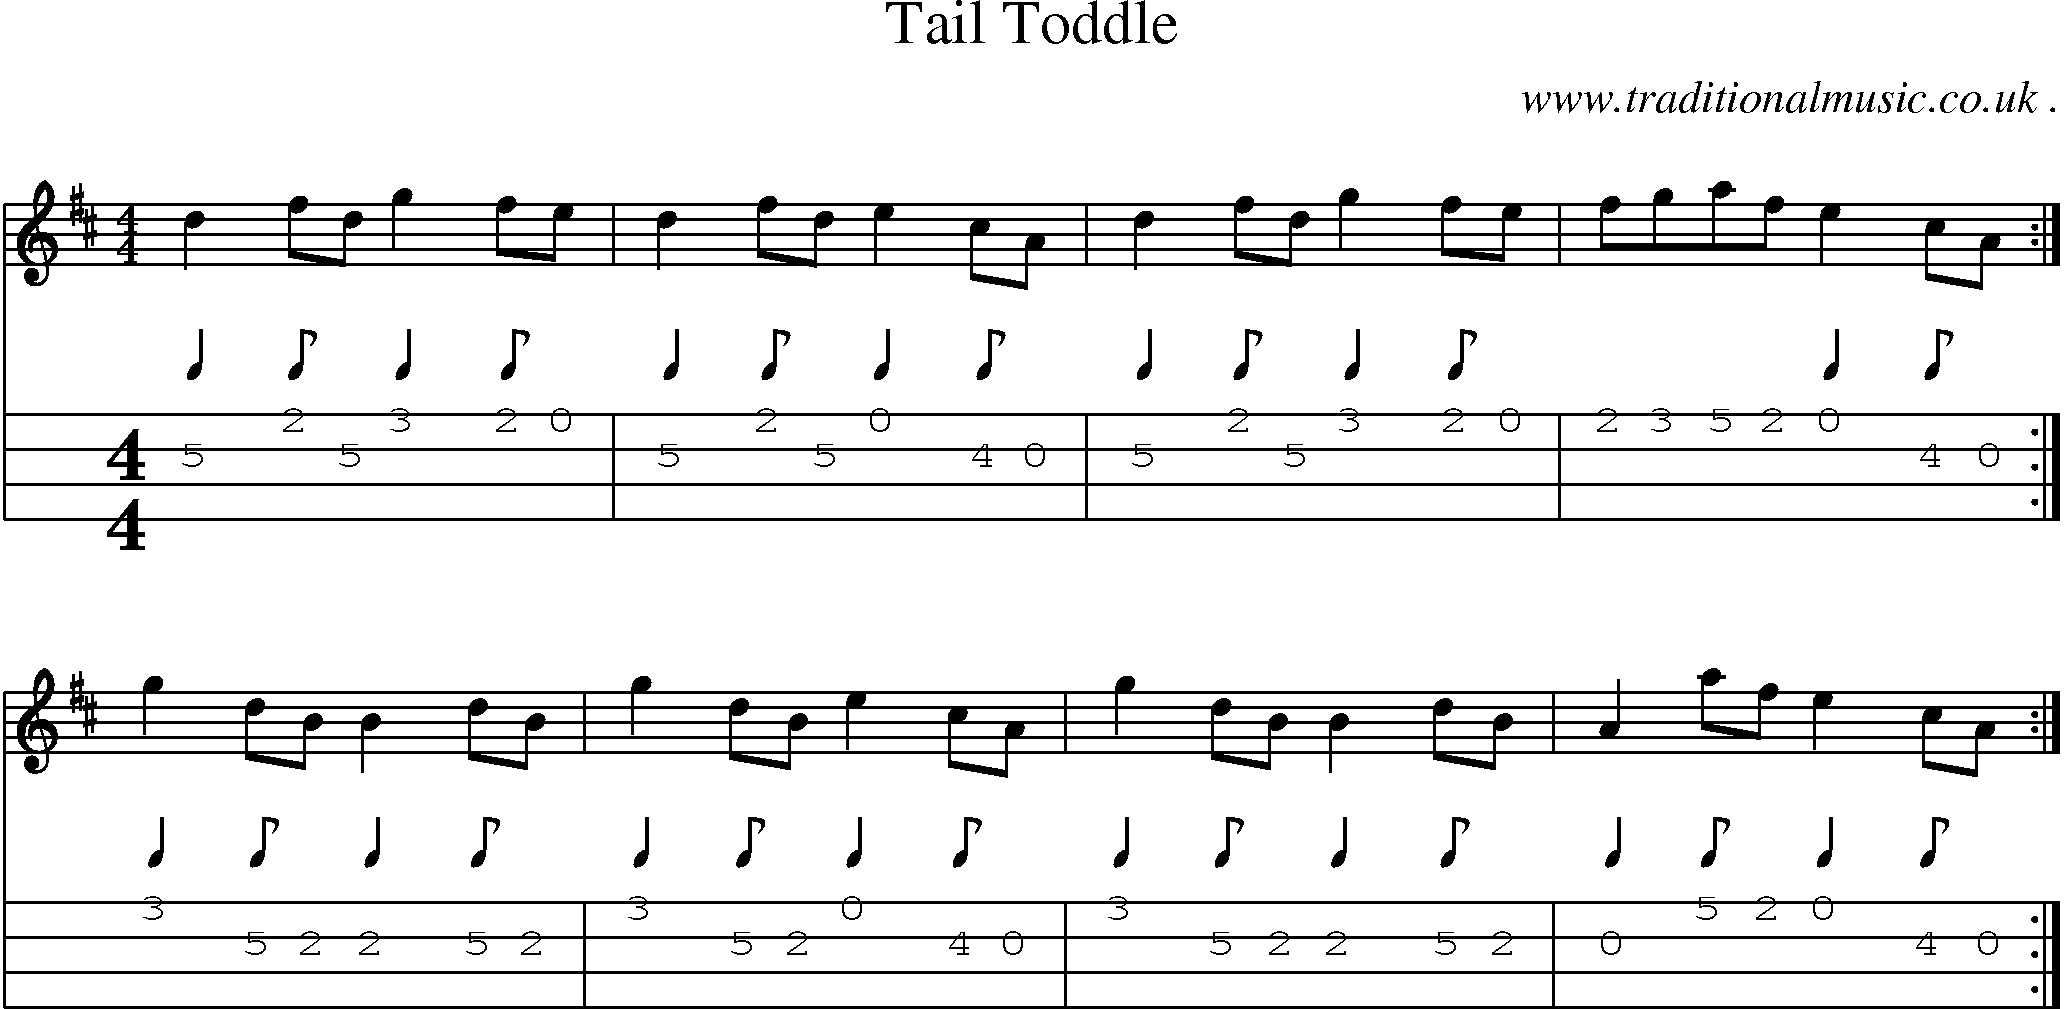 Sheet-music  score, Chords and Mandolin Tabs for Tail Toddle